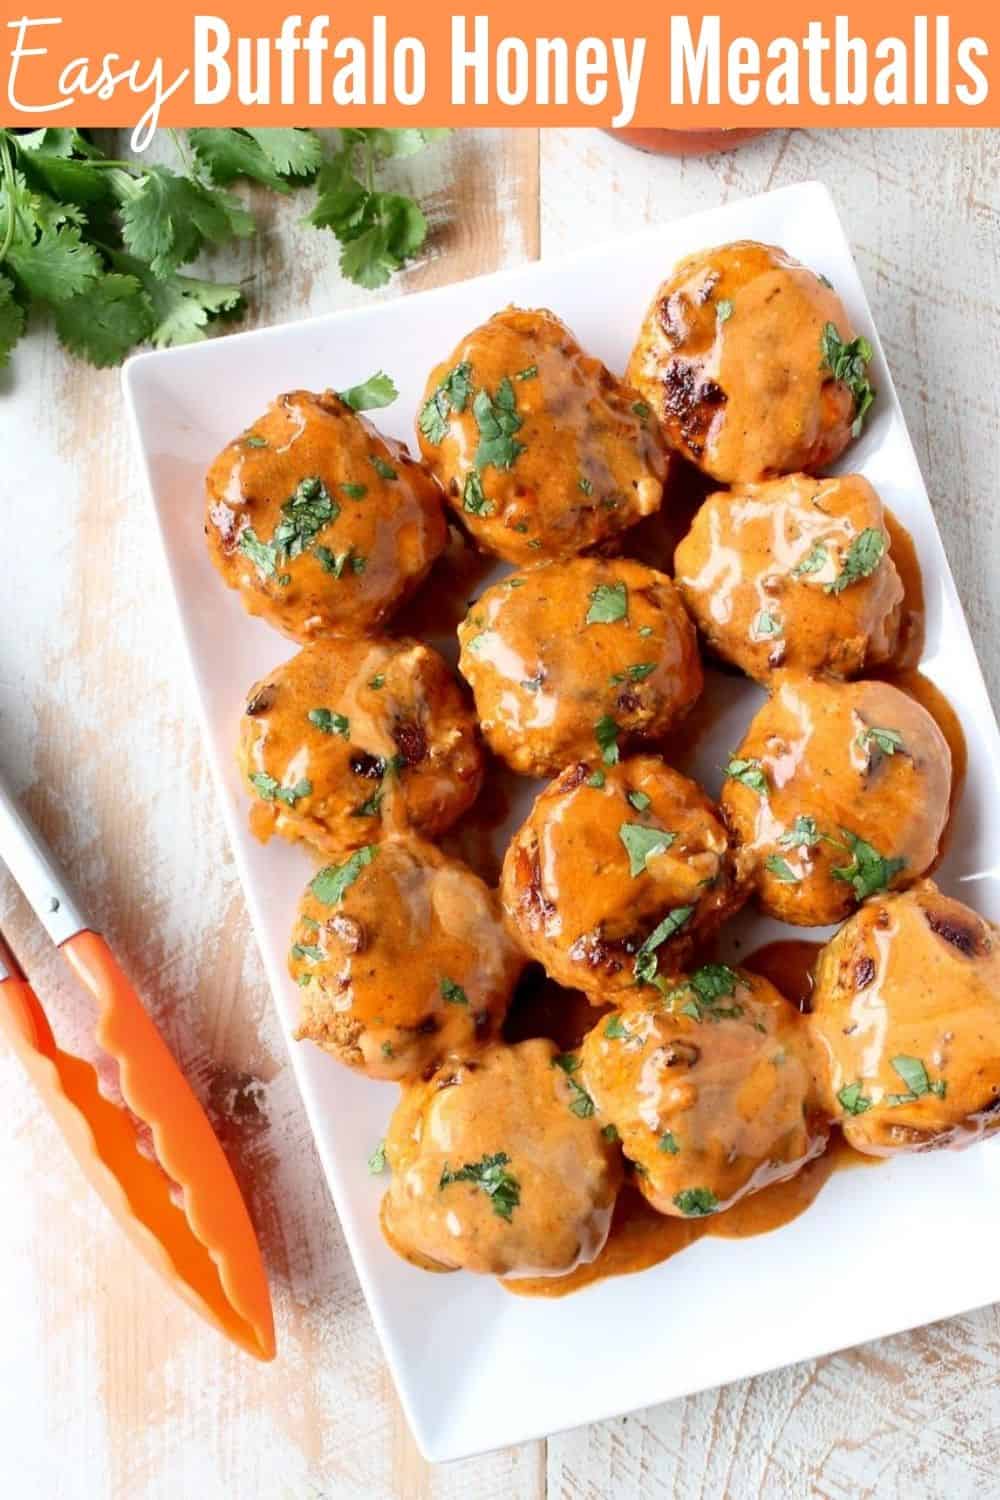 Sweet and Spicy Meatballs with Honey Buffalo Sauce - WhitneyBond.com